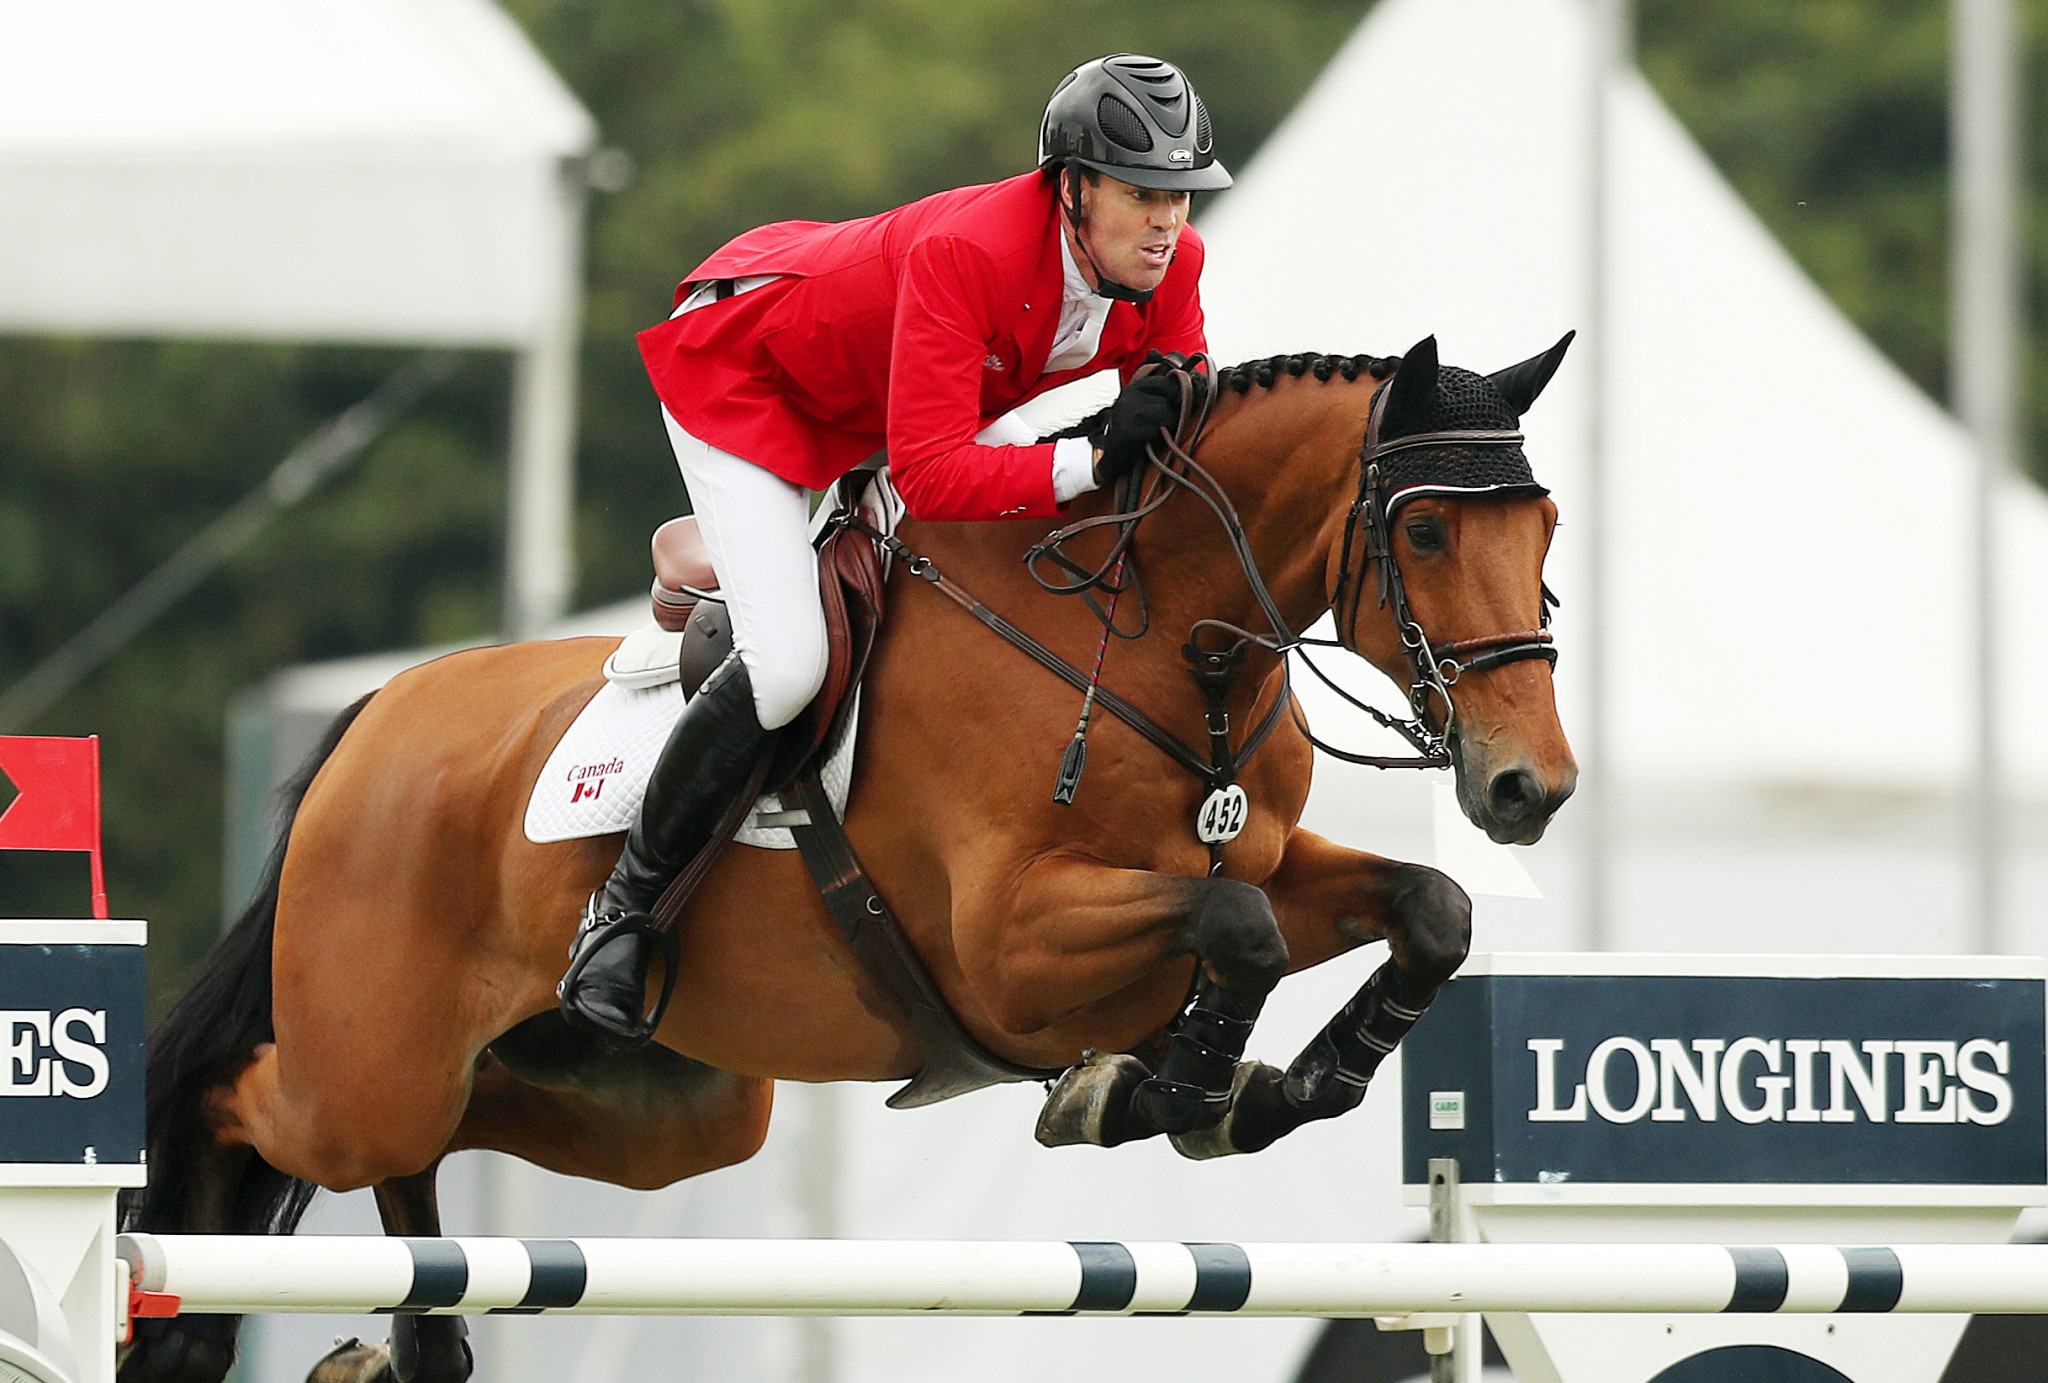 Excellent performance from Millar helps Canada claim gold at FEI Jumping Nations Cup of Mexico